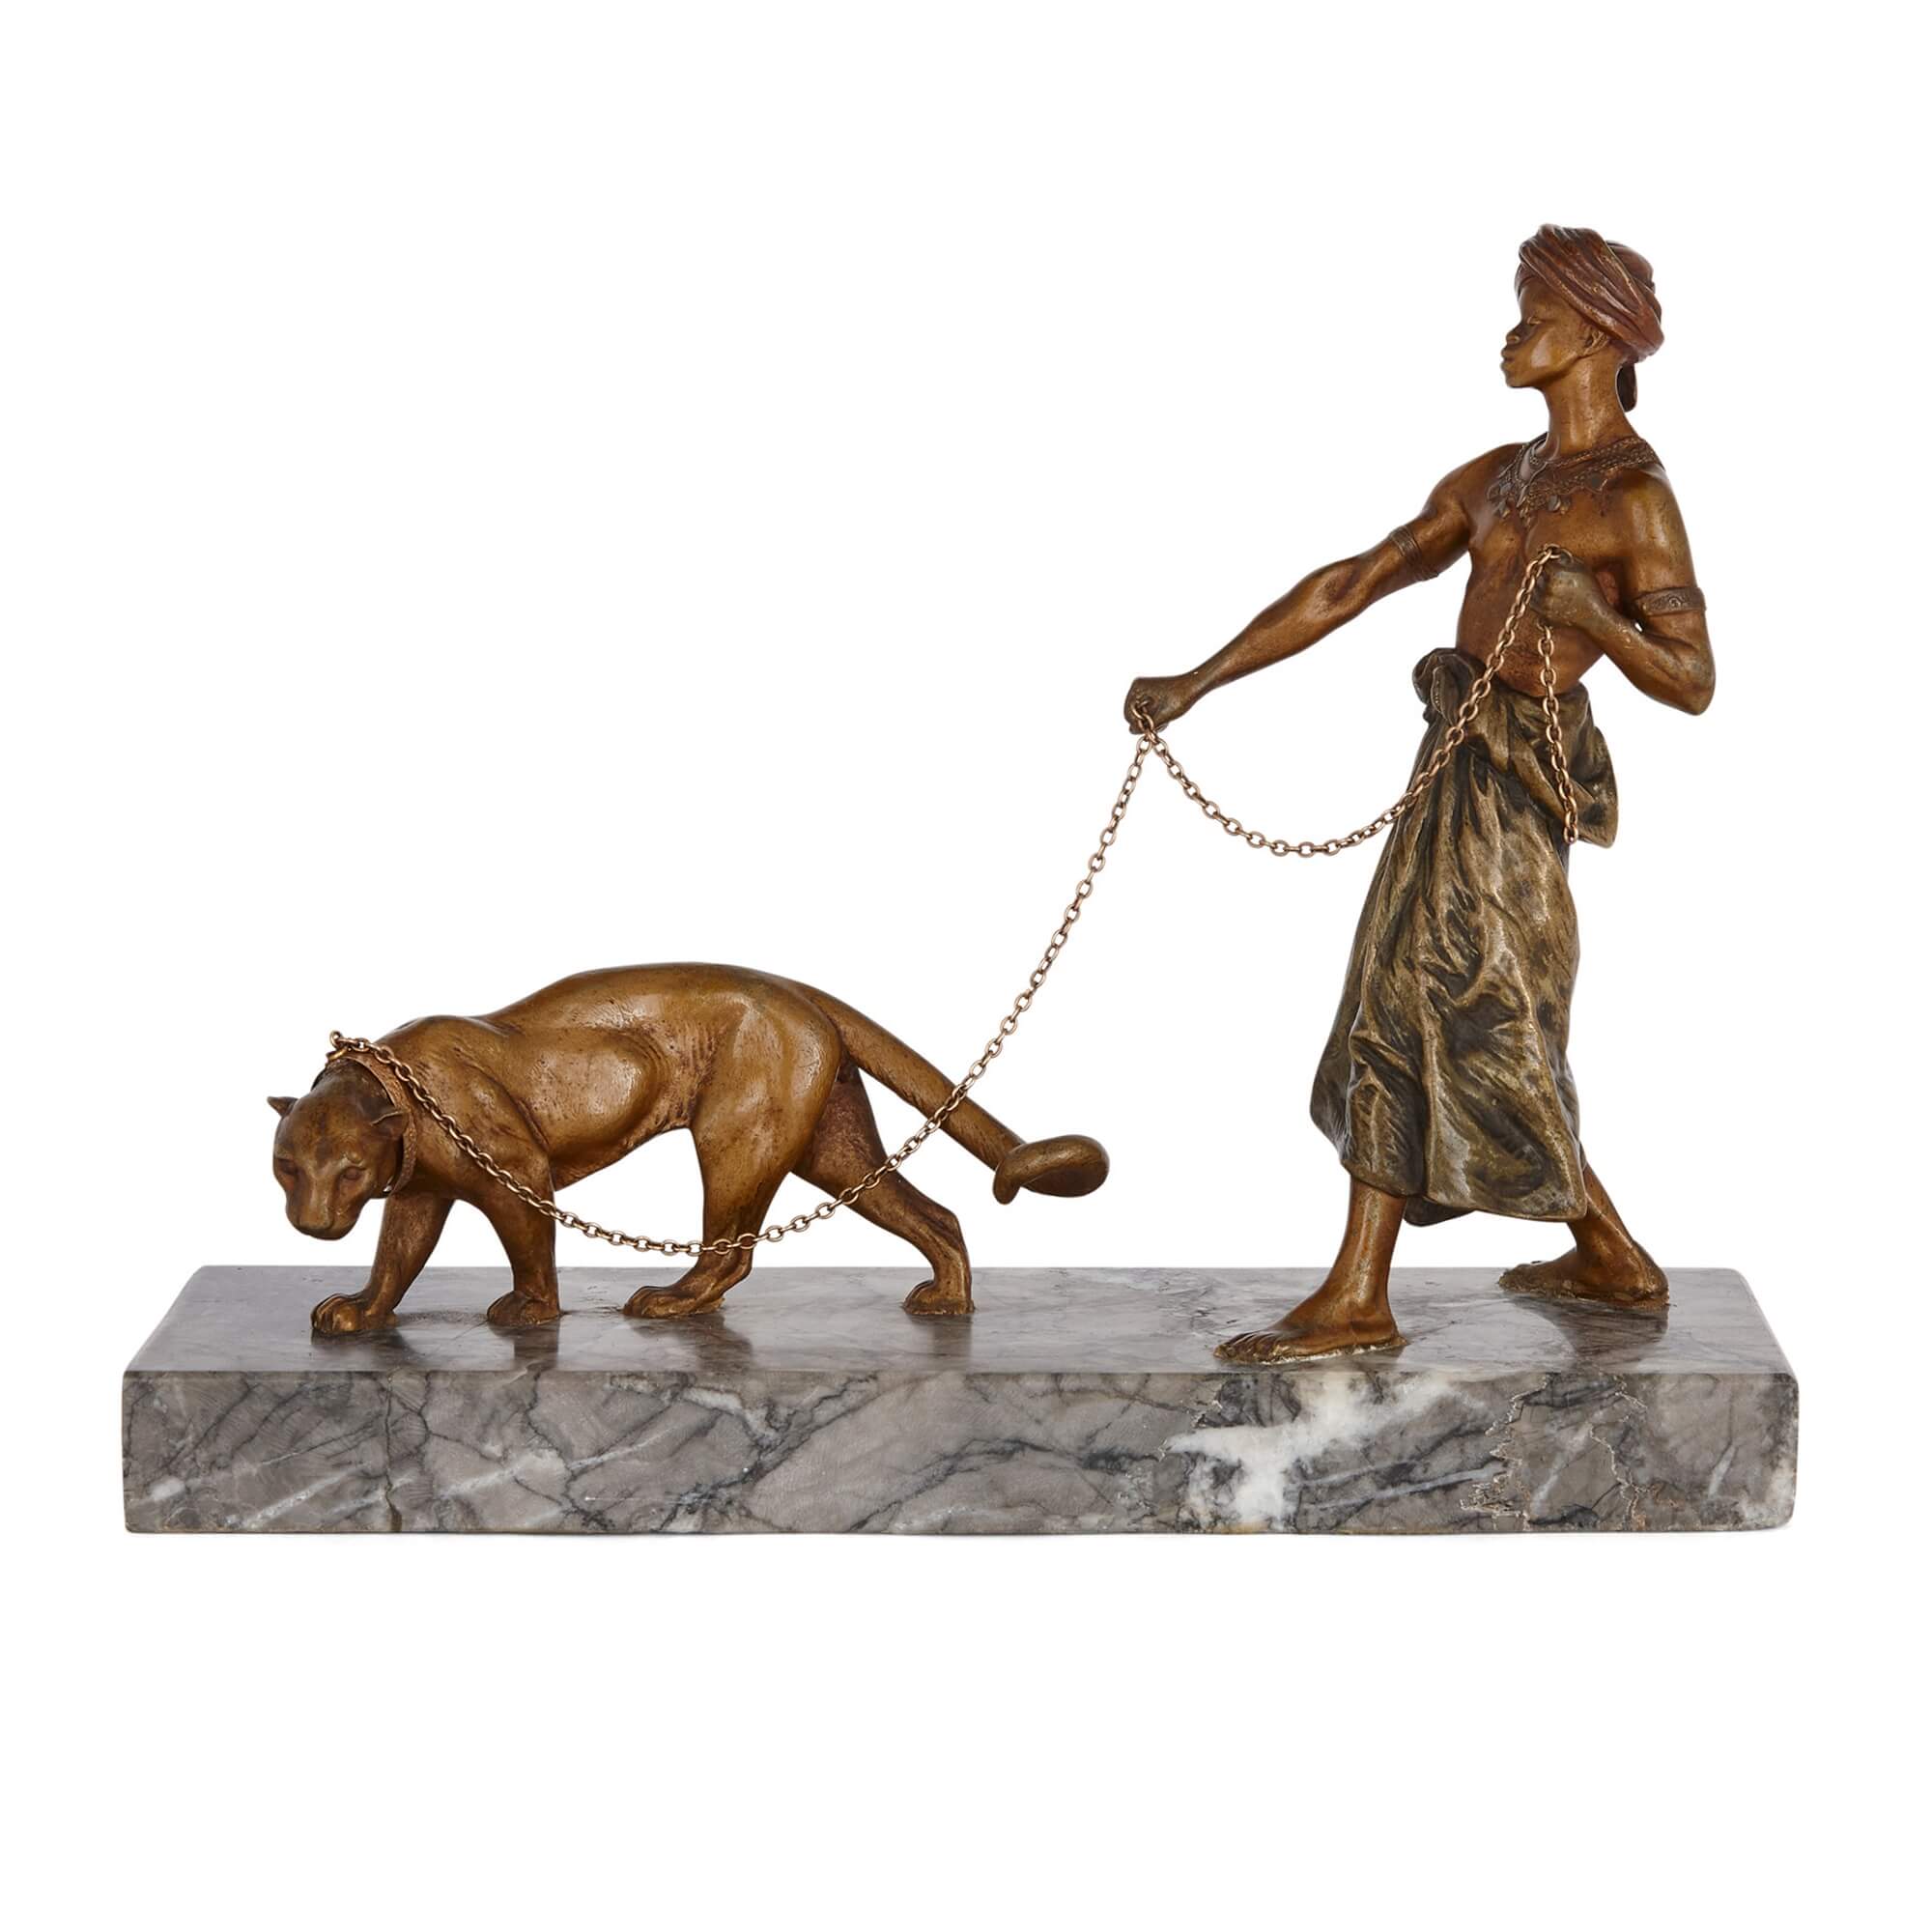 Viennese Cold-Painted Bronze and Marble Figurative Sculpture by Bergman 